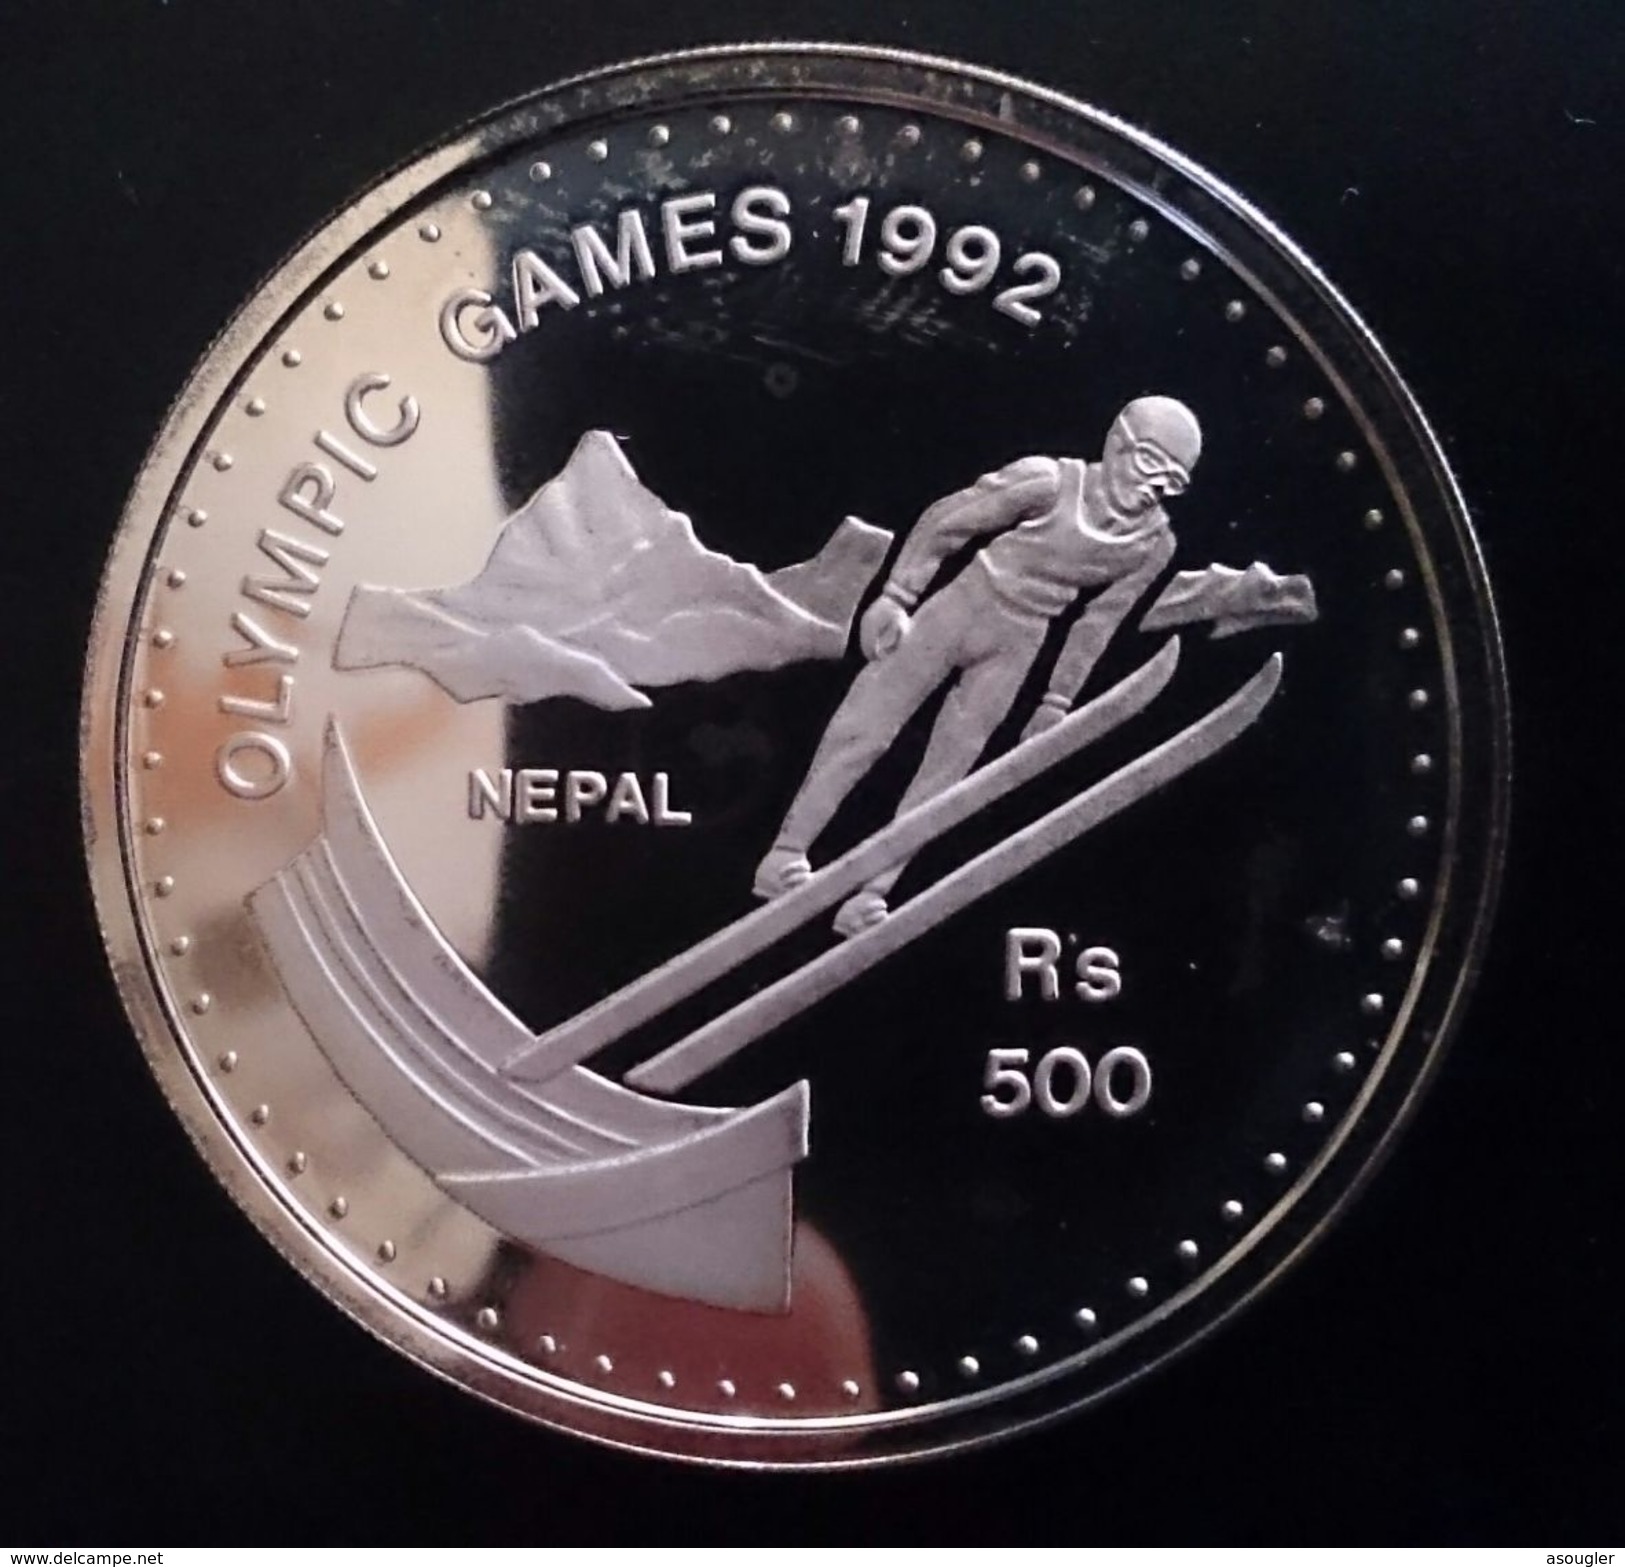 NEPAL 500 RUPEE ND 1992 SILVER PROOF "1992 Olympics Games" Free Shipping Via Registered Air Mail - Nepal